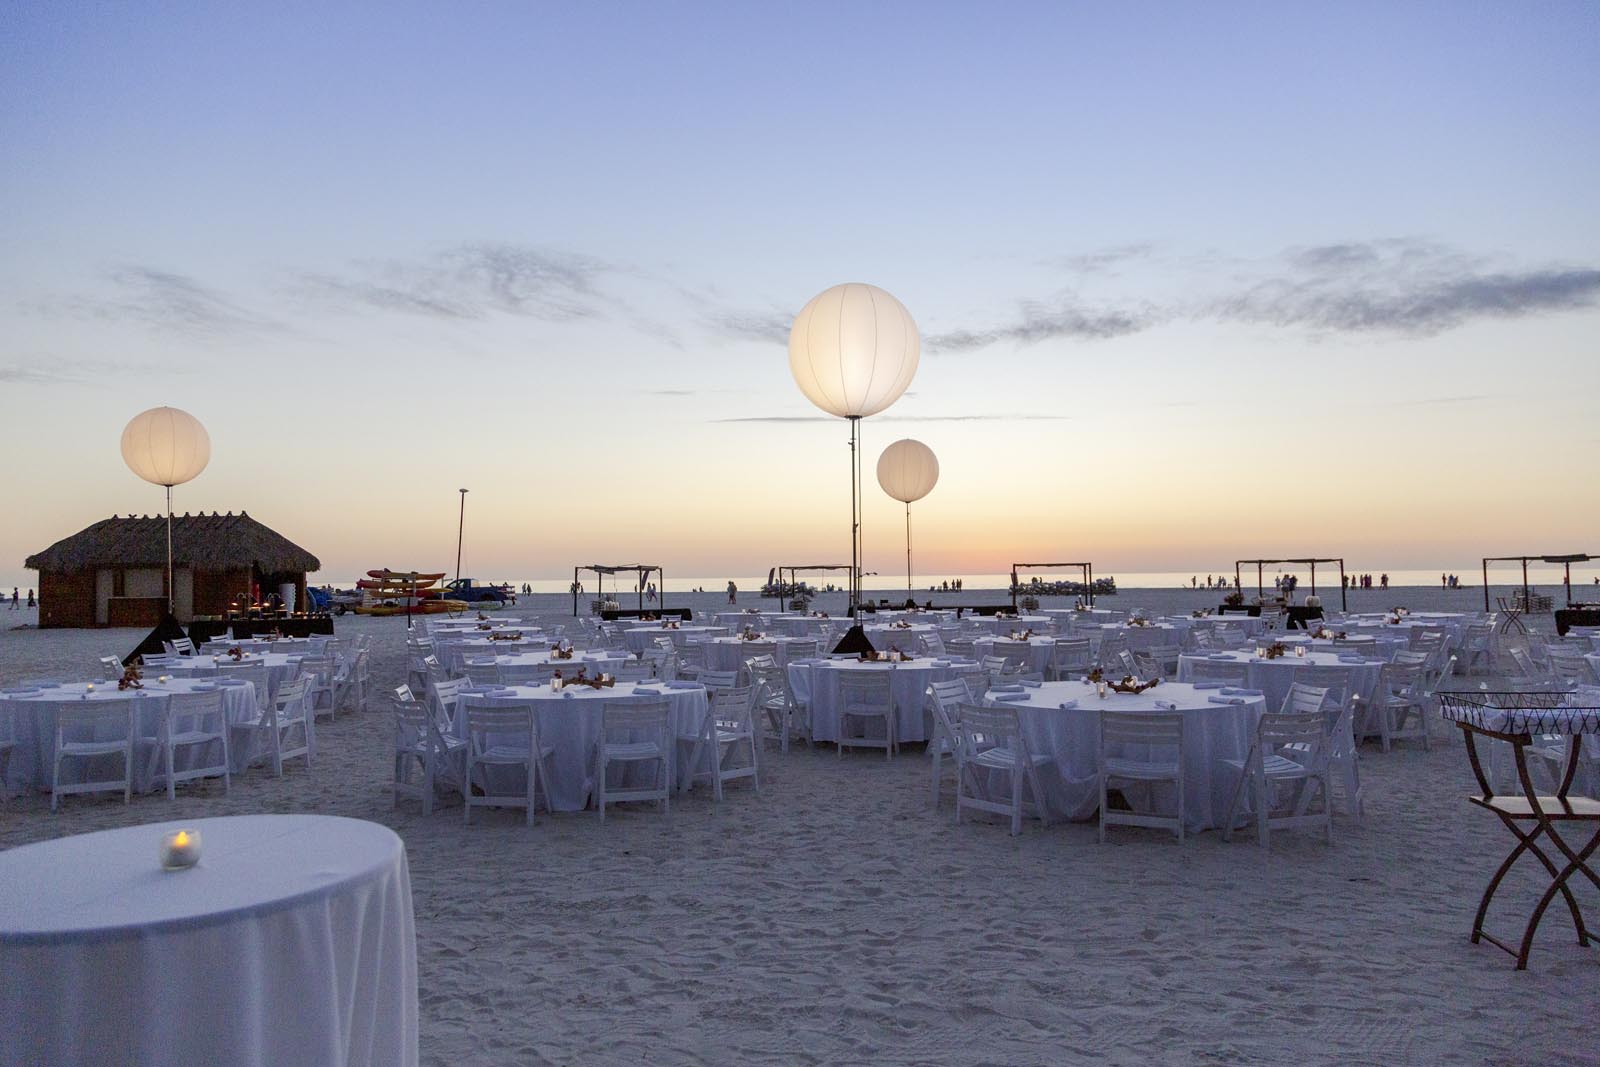 Attendees enjoyed an elegant setting and excellent meal during the celebratory beach reception held on the first evening, February 2. 